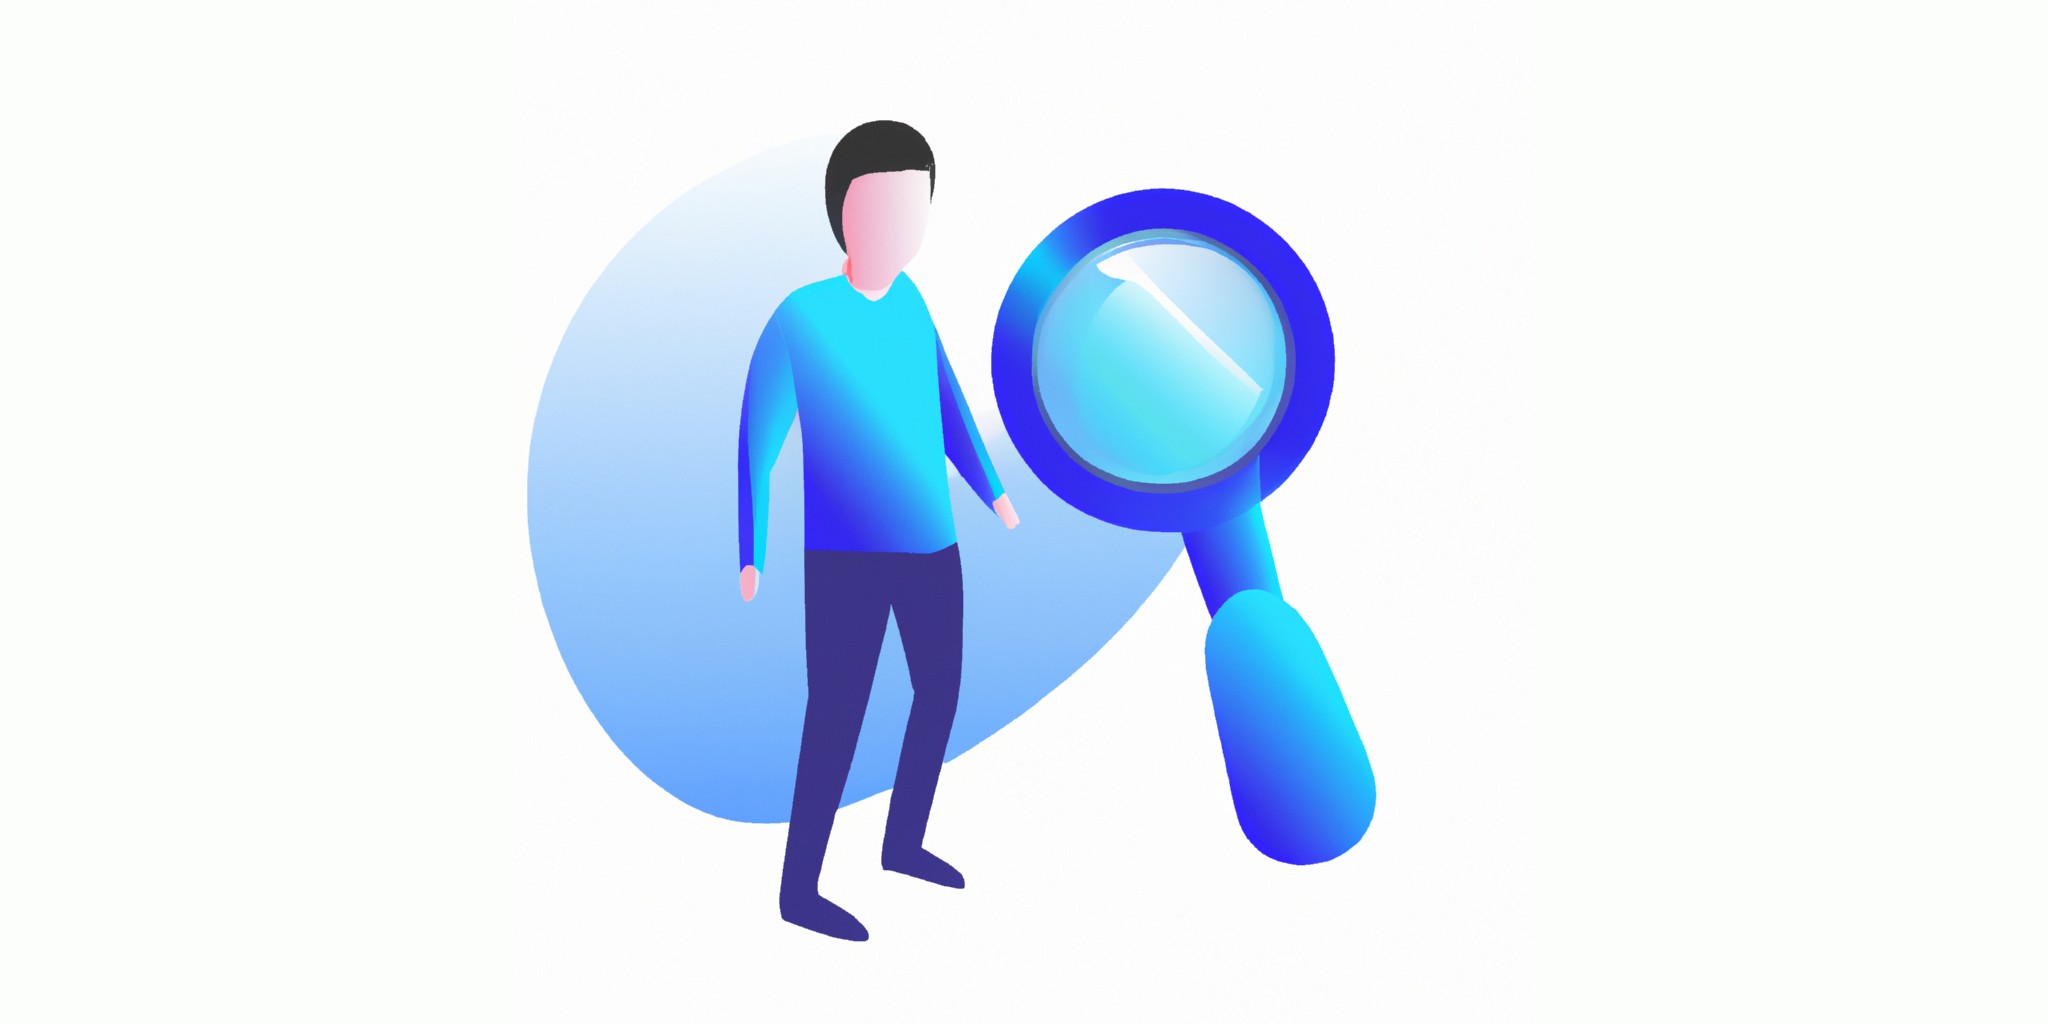 a magnify with a person in front in flat illustration style with gradients and white background